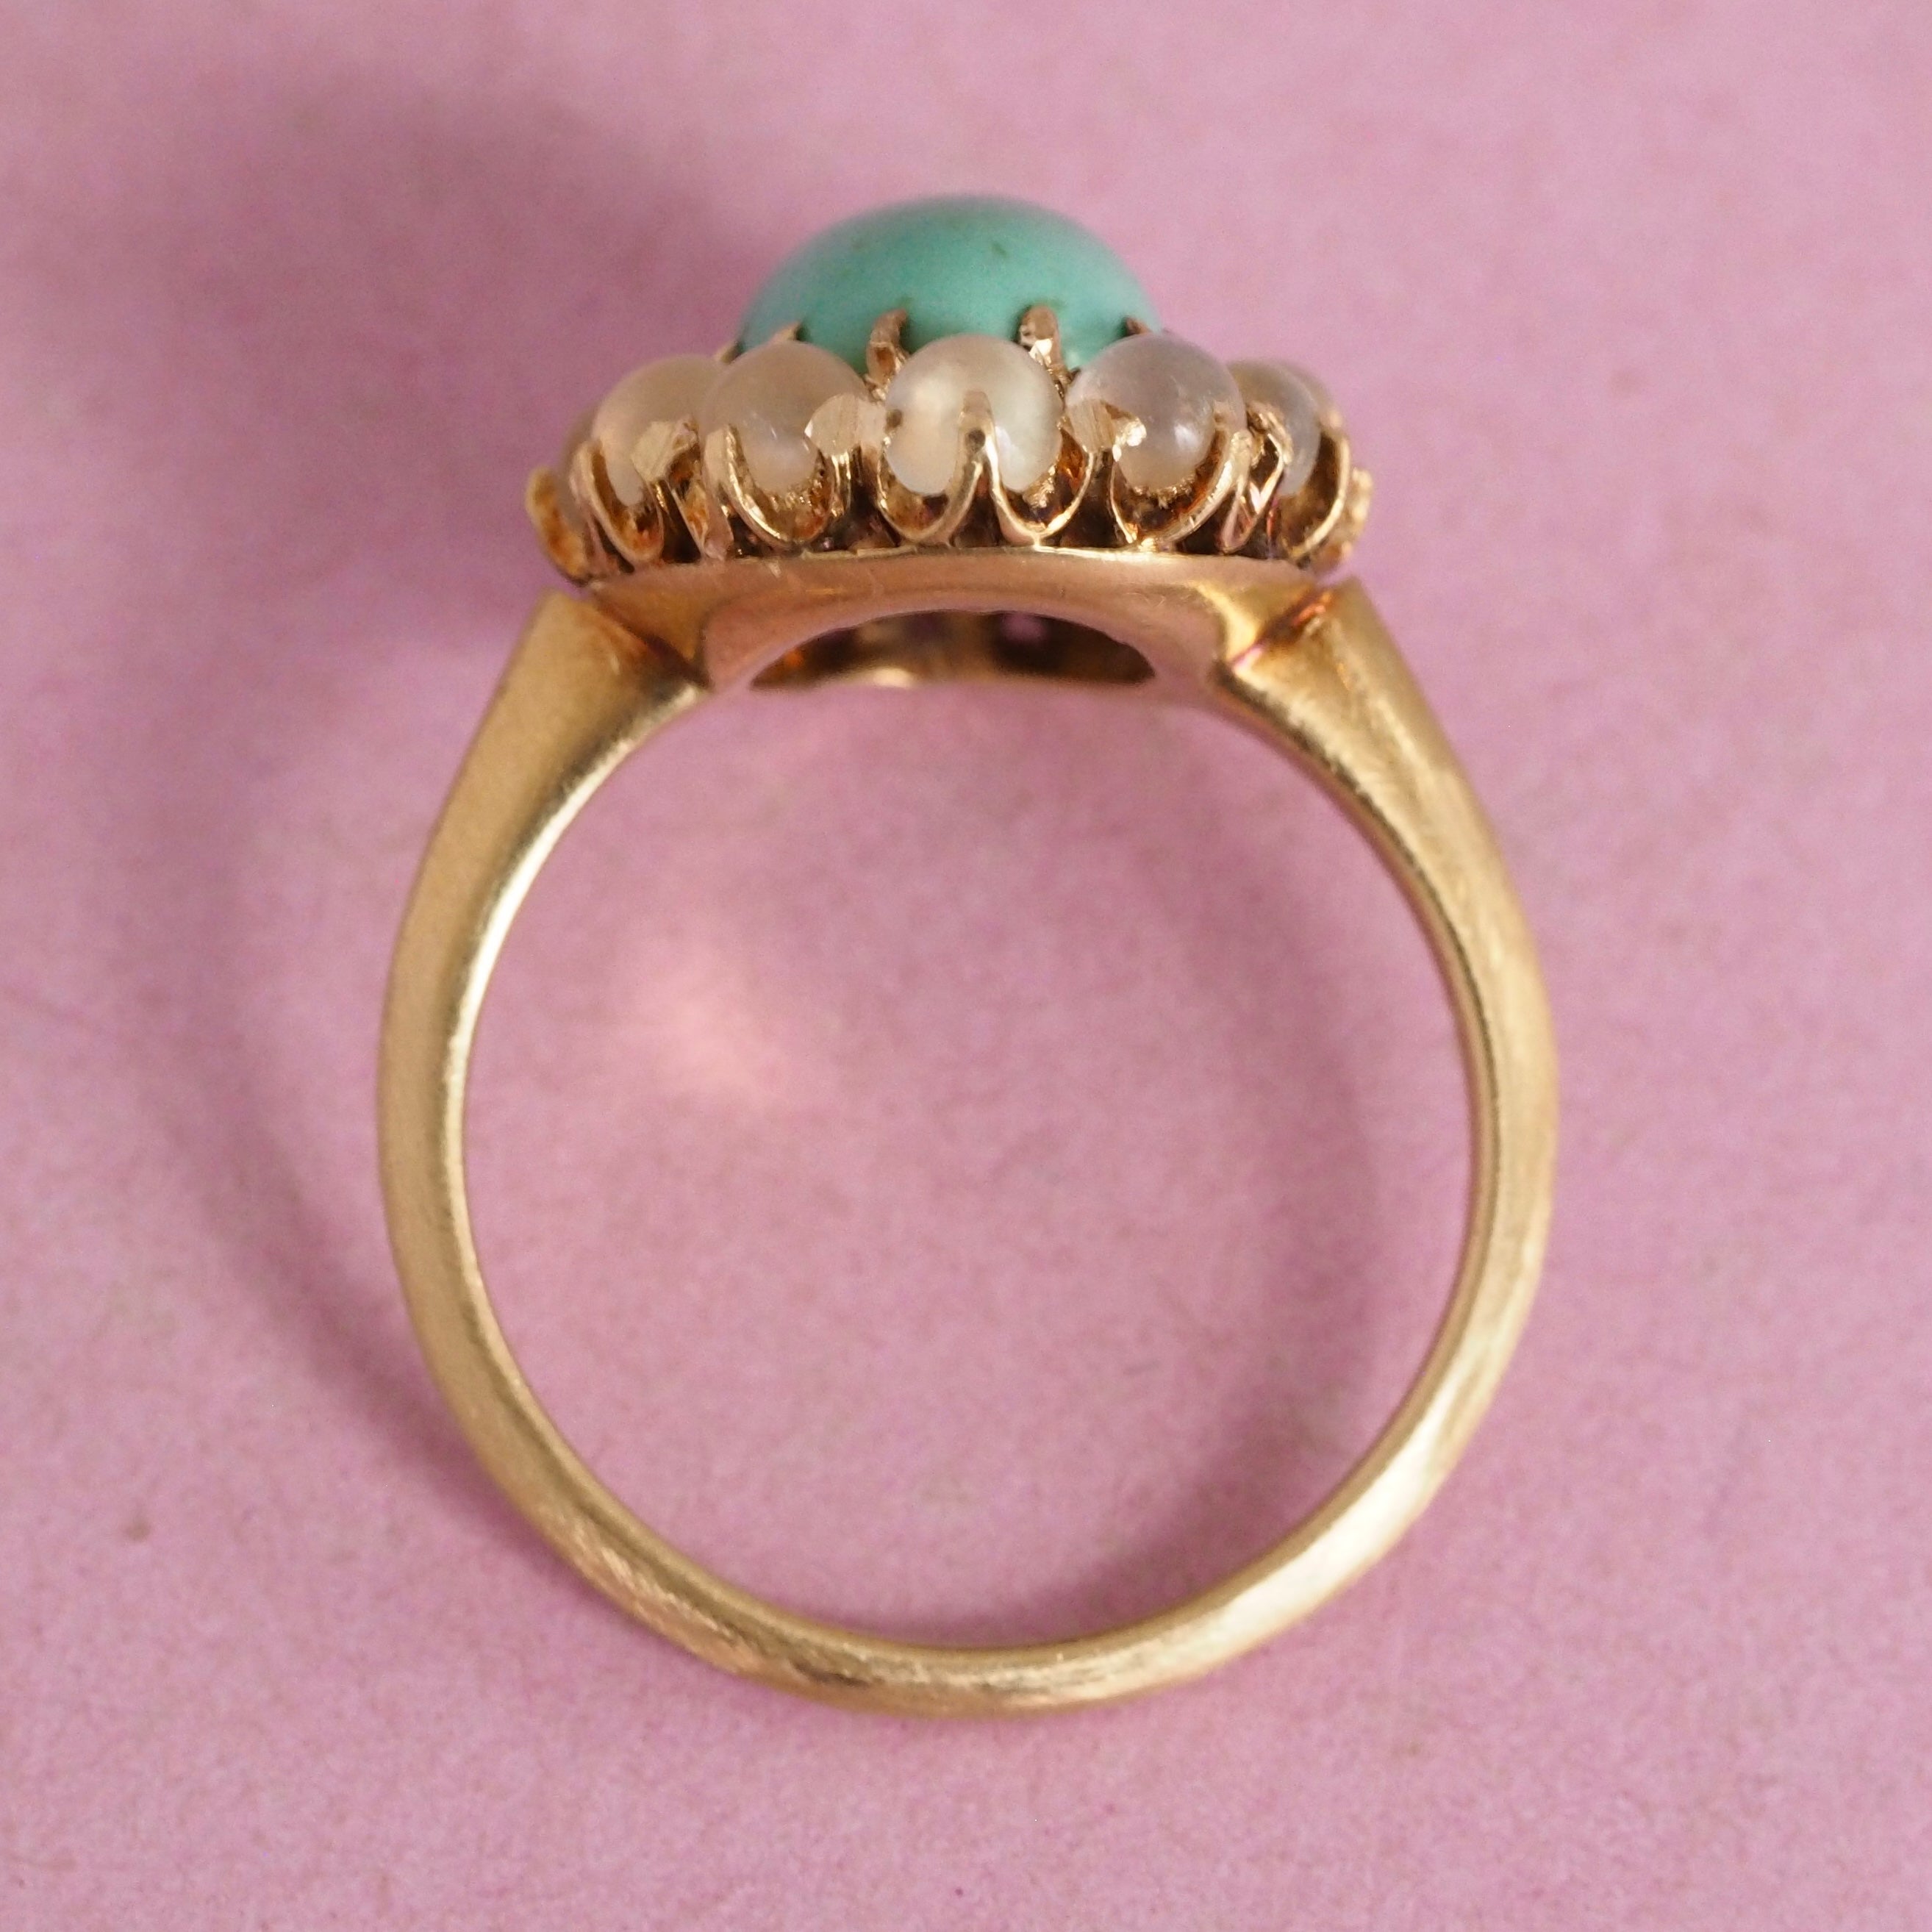 Antique Victorian 18k Gold Turquoise and Moonstone Halo Ring